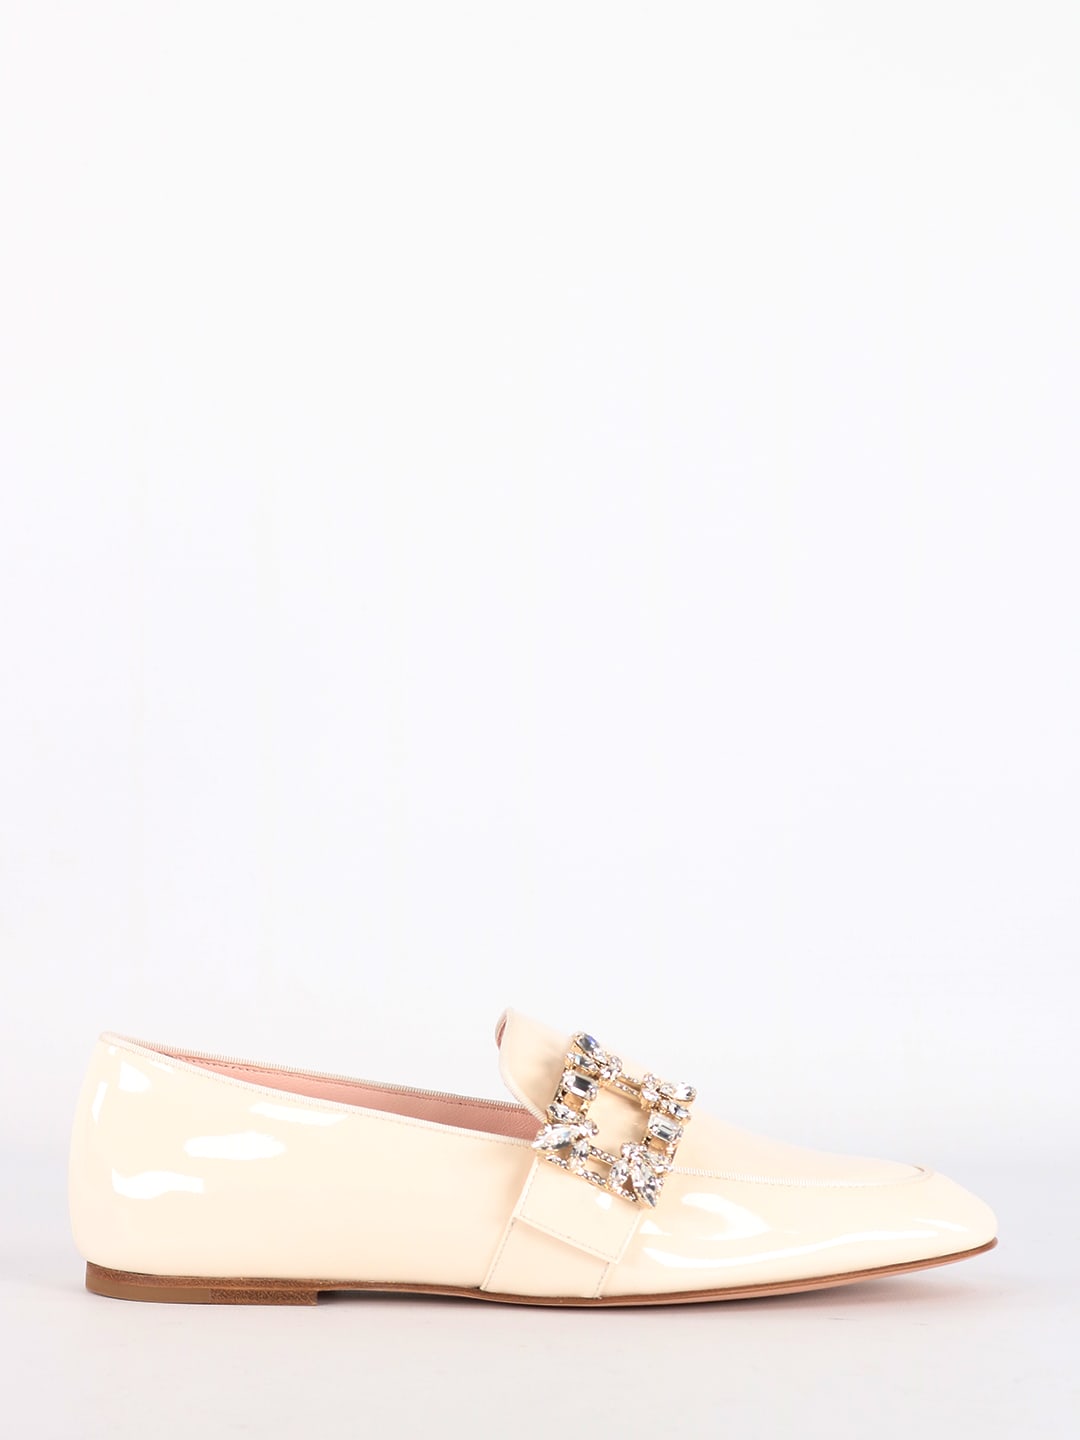 Roger Vivier Cream Patent Leather Loafers